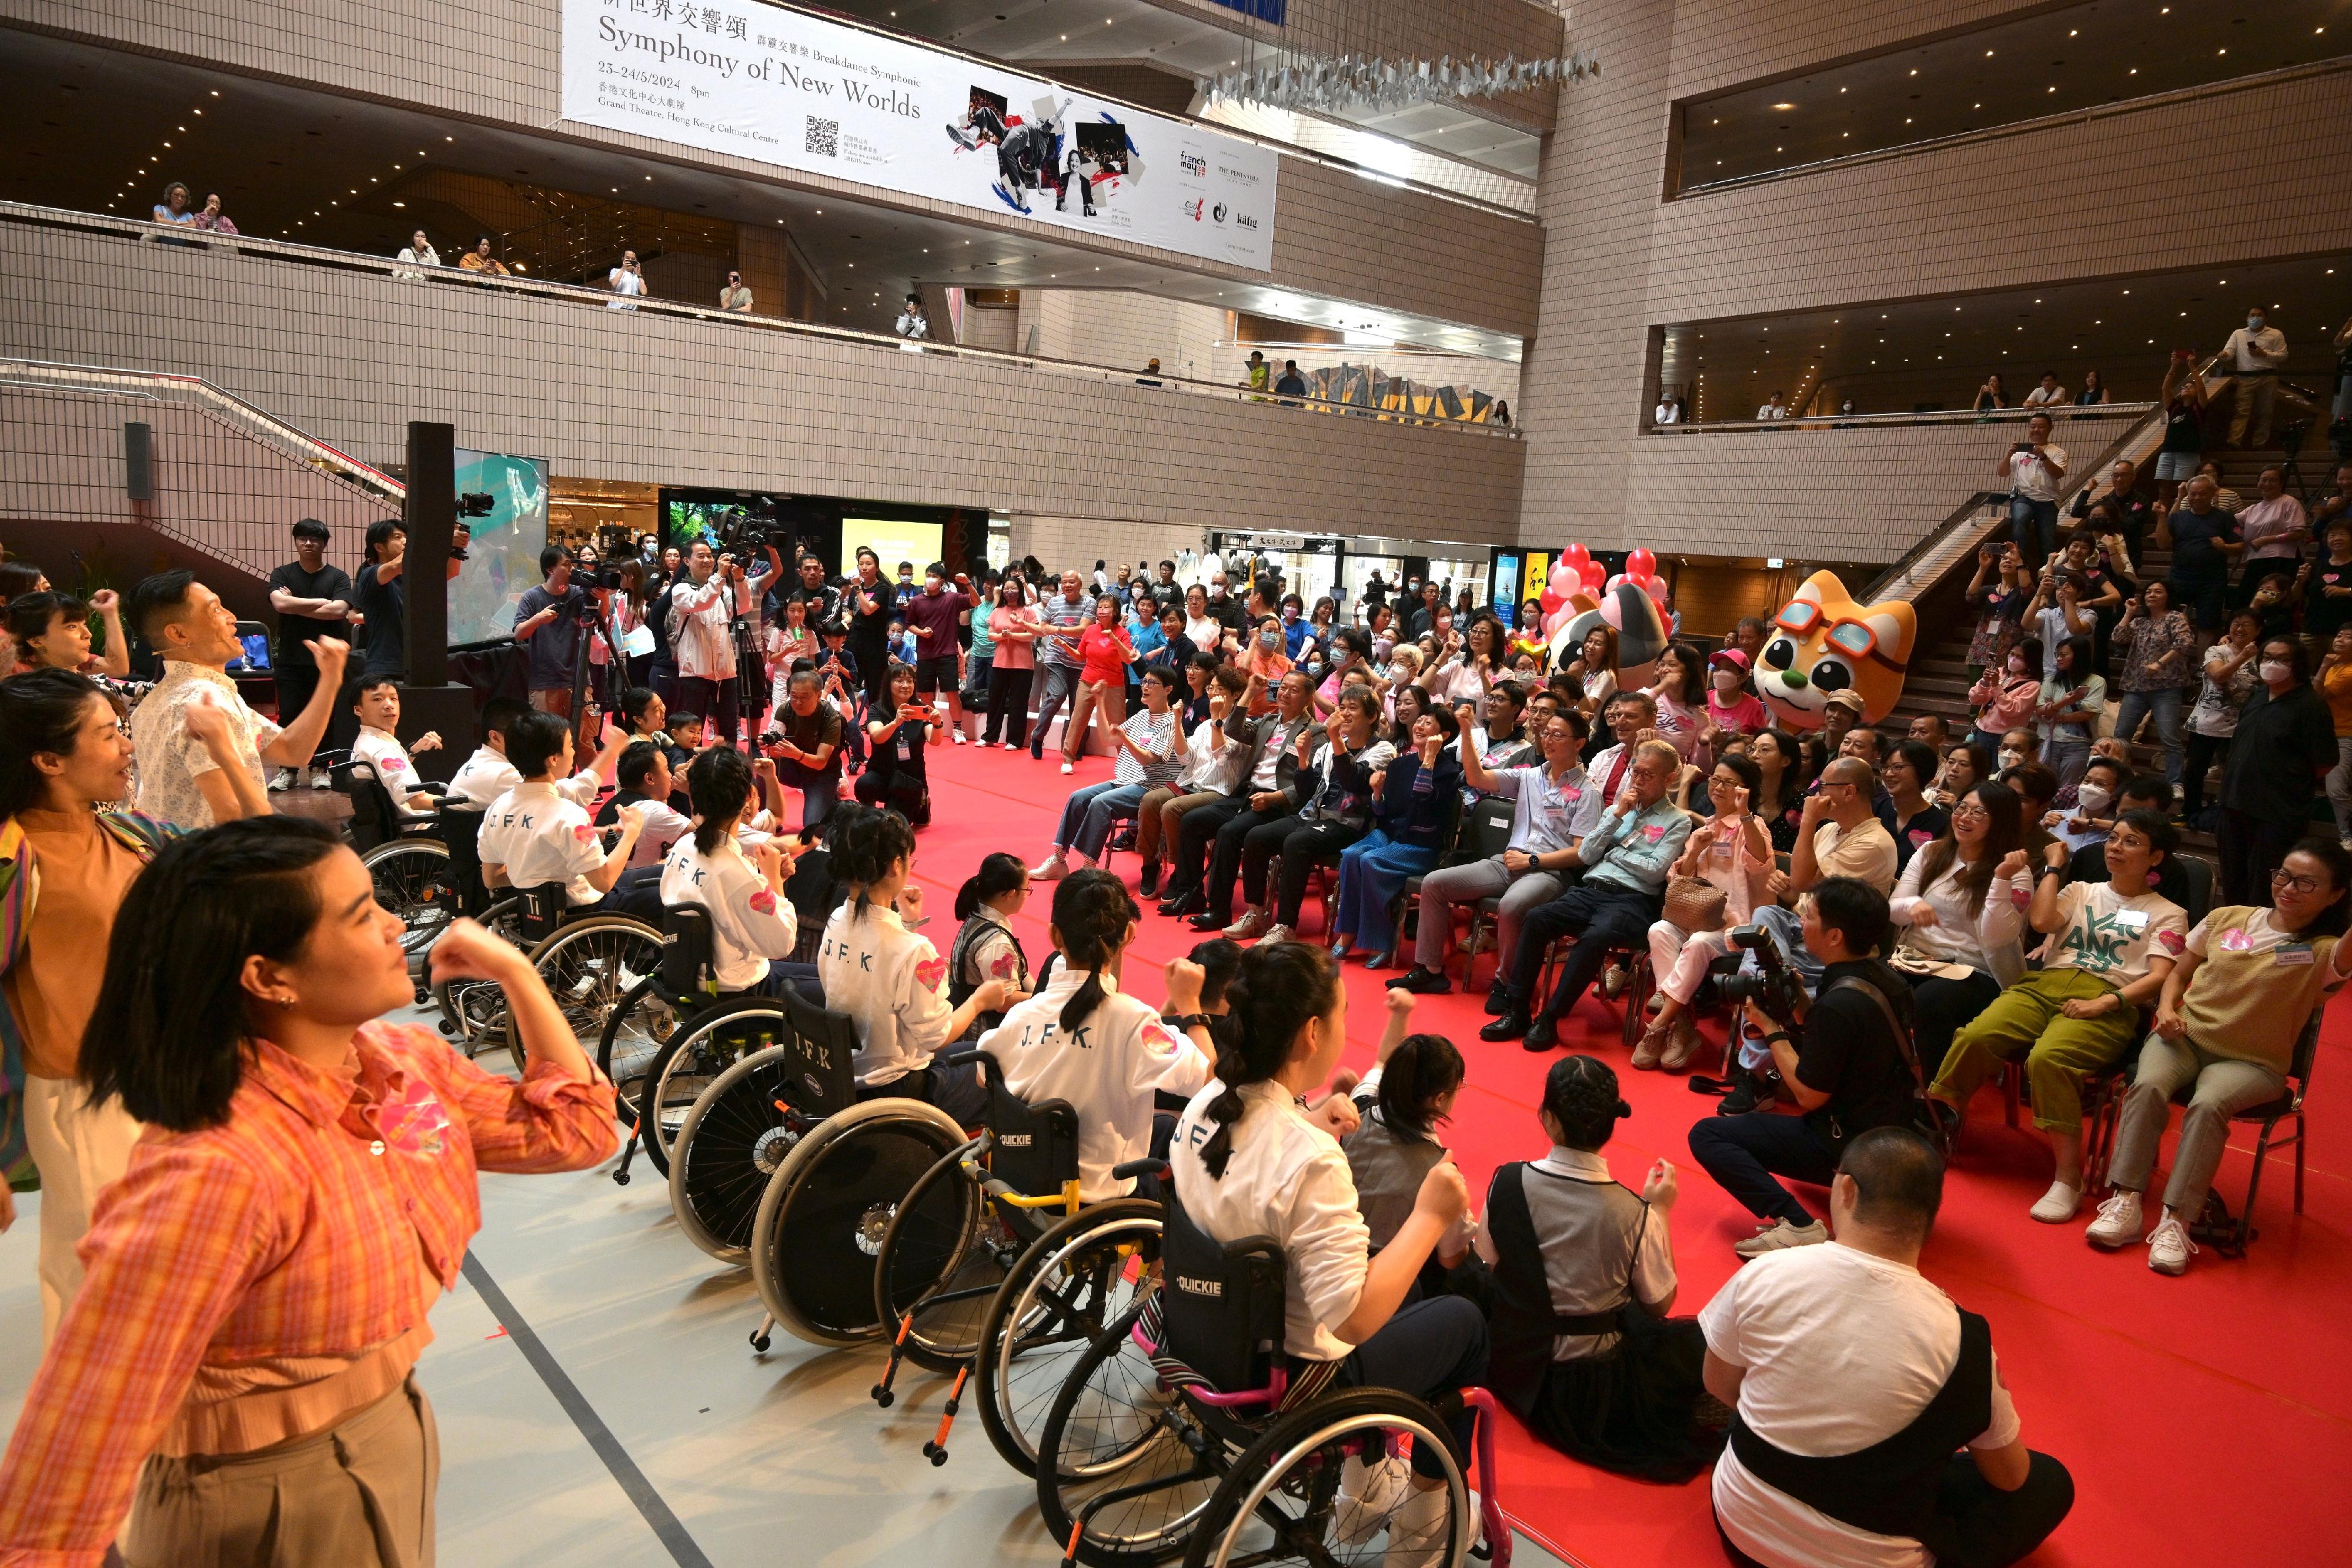 The "Dance for All" Community Care Inclusive Dance Scheme, organised by the Leisure and Cultural Services Department, was launched today (May 5). Photo shows the audience dancing together with the performers, fully showing the unity between disabled and non-disabled people.